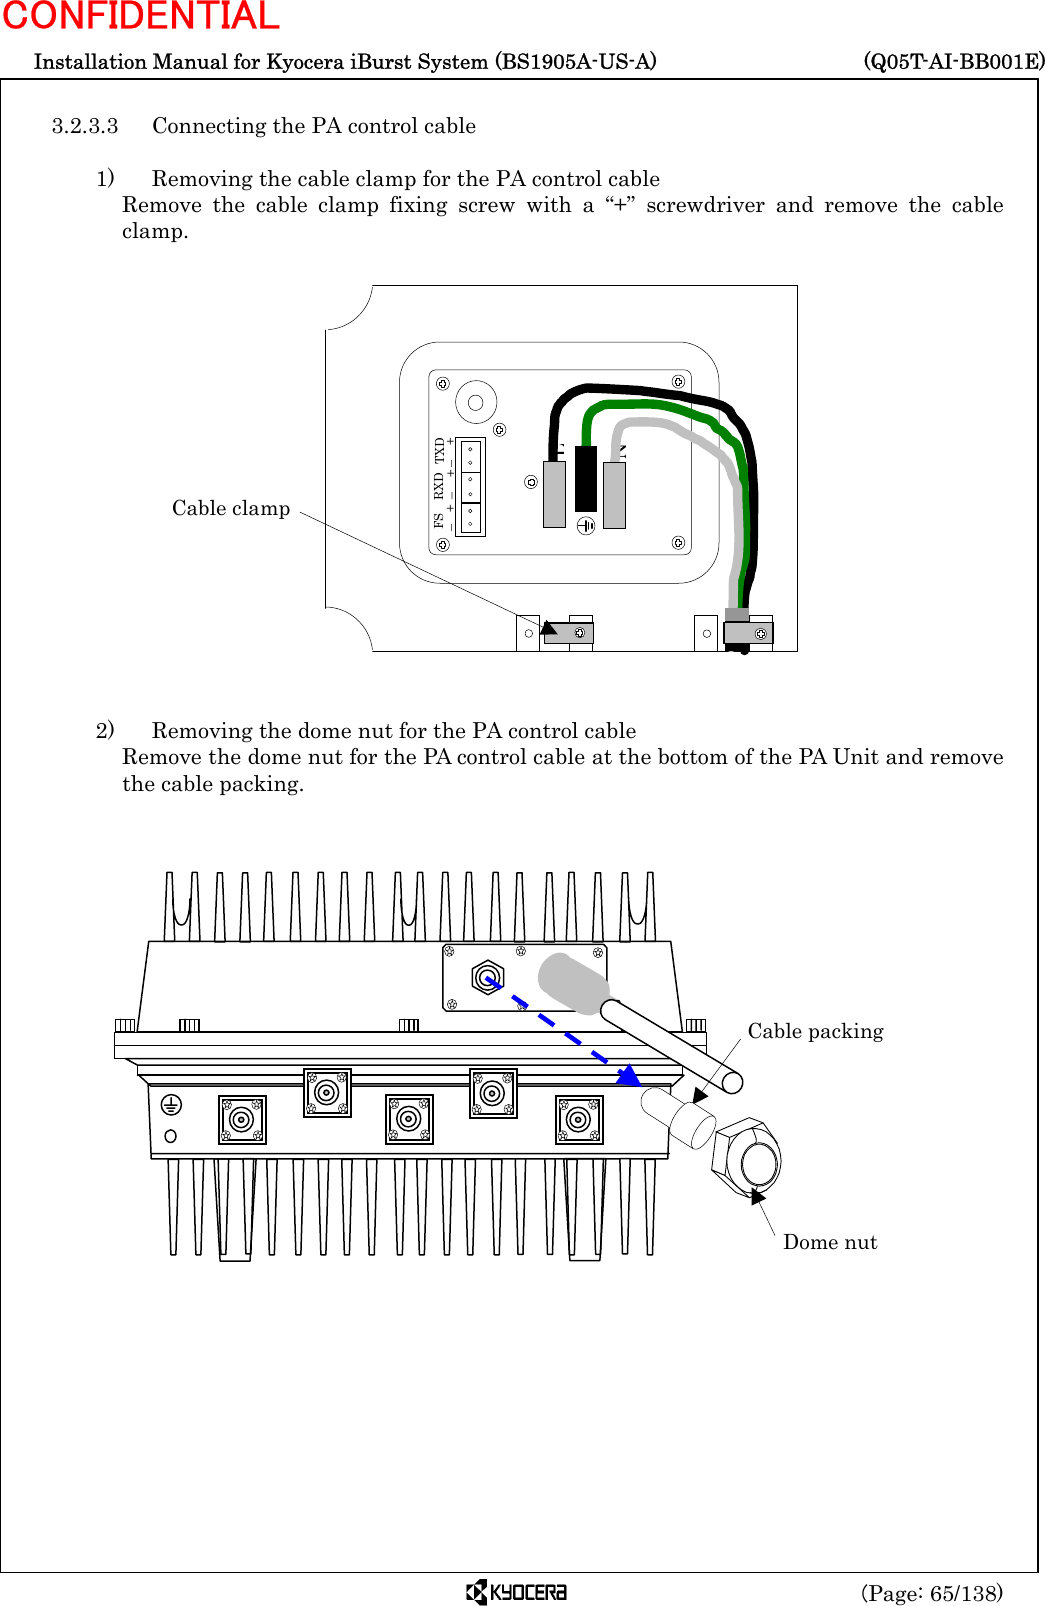  Installation Manual for Kyocera iBurst System (BS1905A-US-A)     (Q05T-AI-BB001E) (Page: 65/138) CONFIDENTIAL  3.2.3.3  Connecting the PA control cable  1)    Removing the cable clamp for the PA control cable Remove the cable clamp fixing screw with a “+” screwdriver and remove the cable clamp.                   2)    Removing the dome nut for the PA control cable Remove the dome nut for the PA control cable at the bottom of the PA Unit and remove the cable packing.                          Cable packing Dome nut N L   FS –  + RXD –  +  TXD –  + Cable clamp 